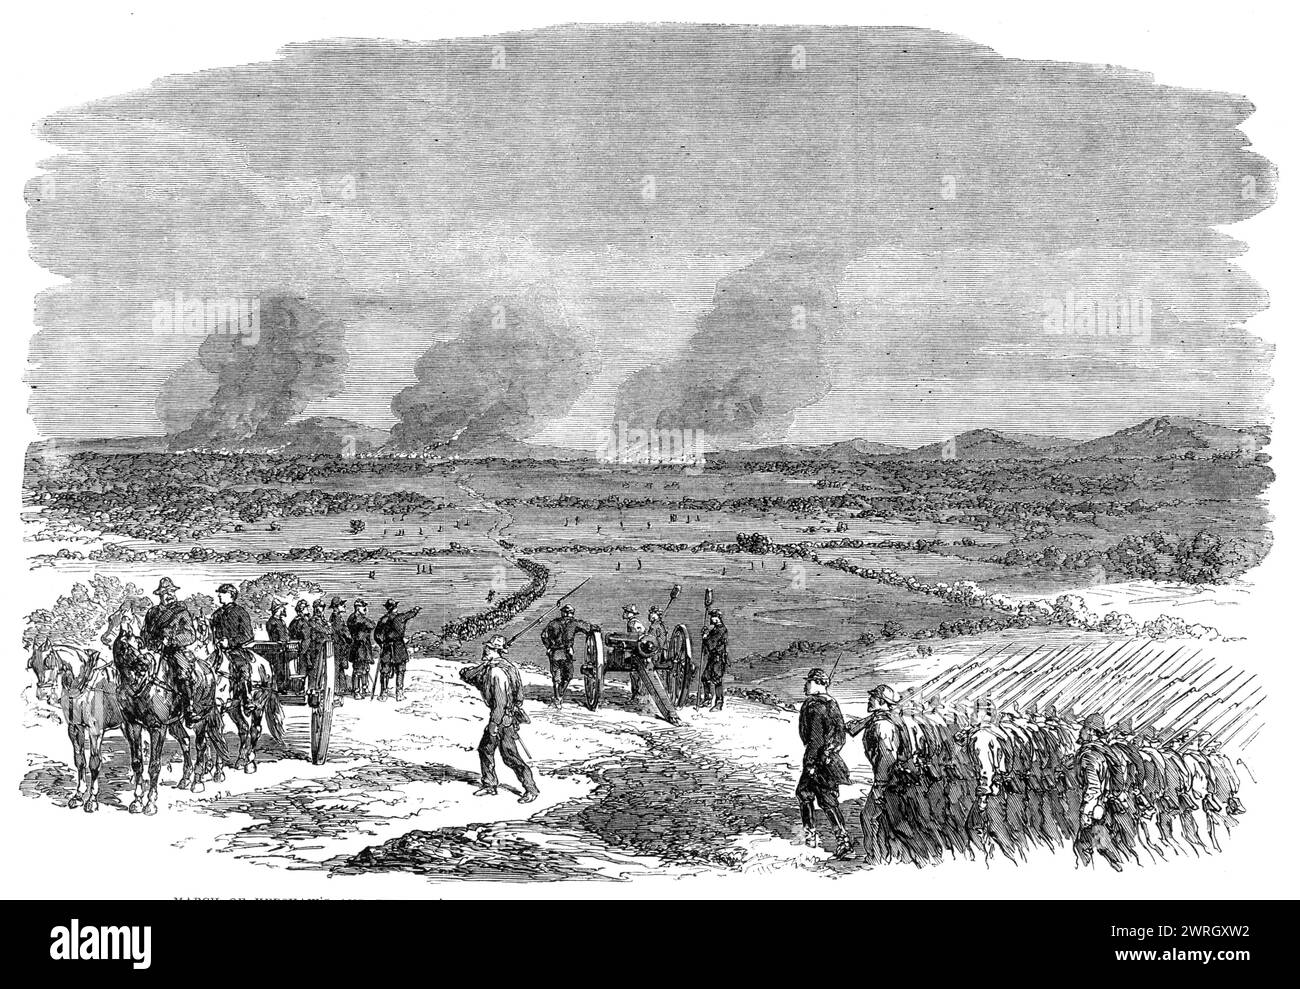 The War in America: march of Kershaw's and Fitz Lee's divisions of the Confederate Army up the valley of Virginia, 1864. 'We have received, from our Special Artist and Correspondent with the army of the Confederate States in Virginia...sketches illustrative of the recent operations in the Shenandoah Valley...[The engraving shows] the march of the divisions commanded by Kershaw and Fitz Lee...on their way to form a junction with the forces under General Early, near Winchester...the valley...here spreads to such width that it should rather be called a plain. The Blue Ridge is seen in the distanc Stock Photo